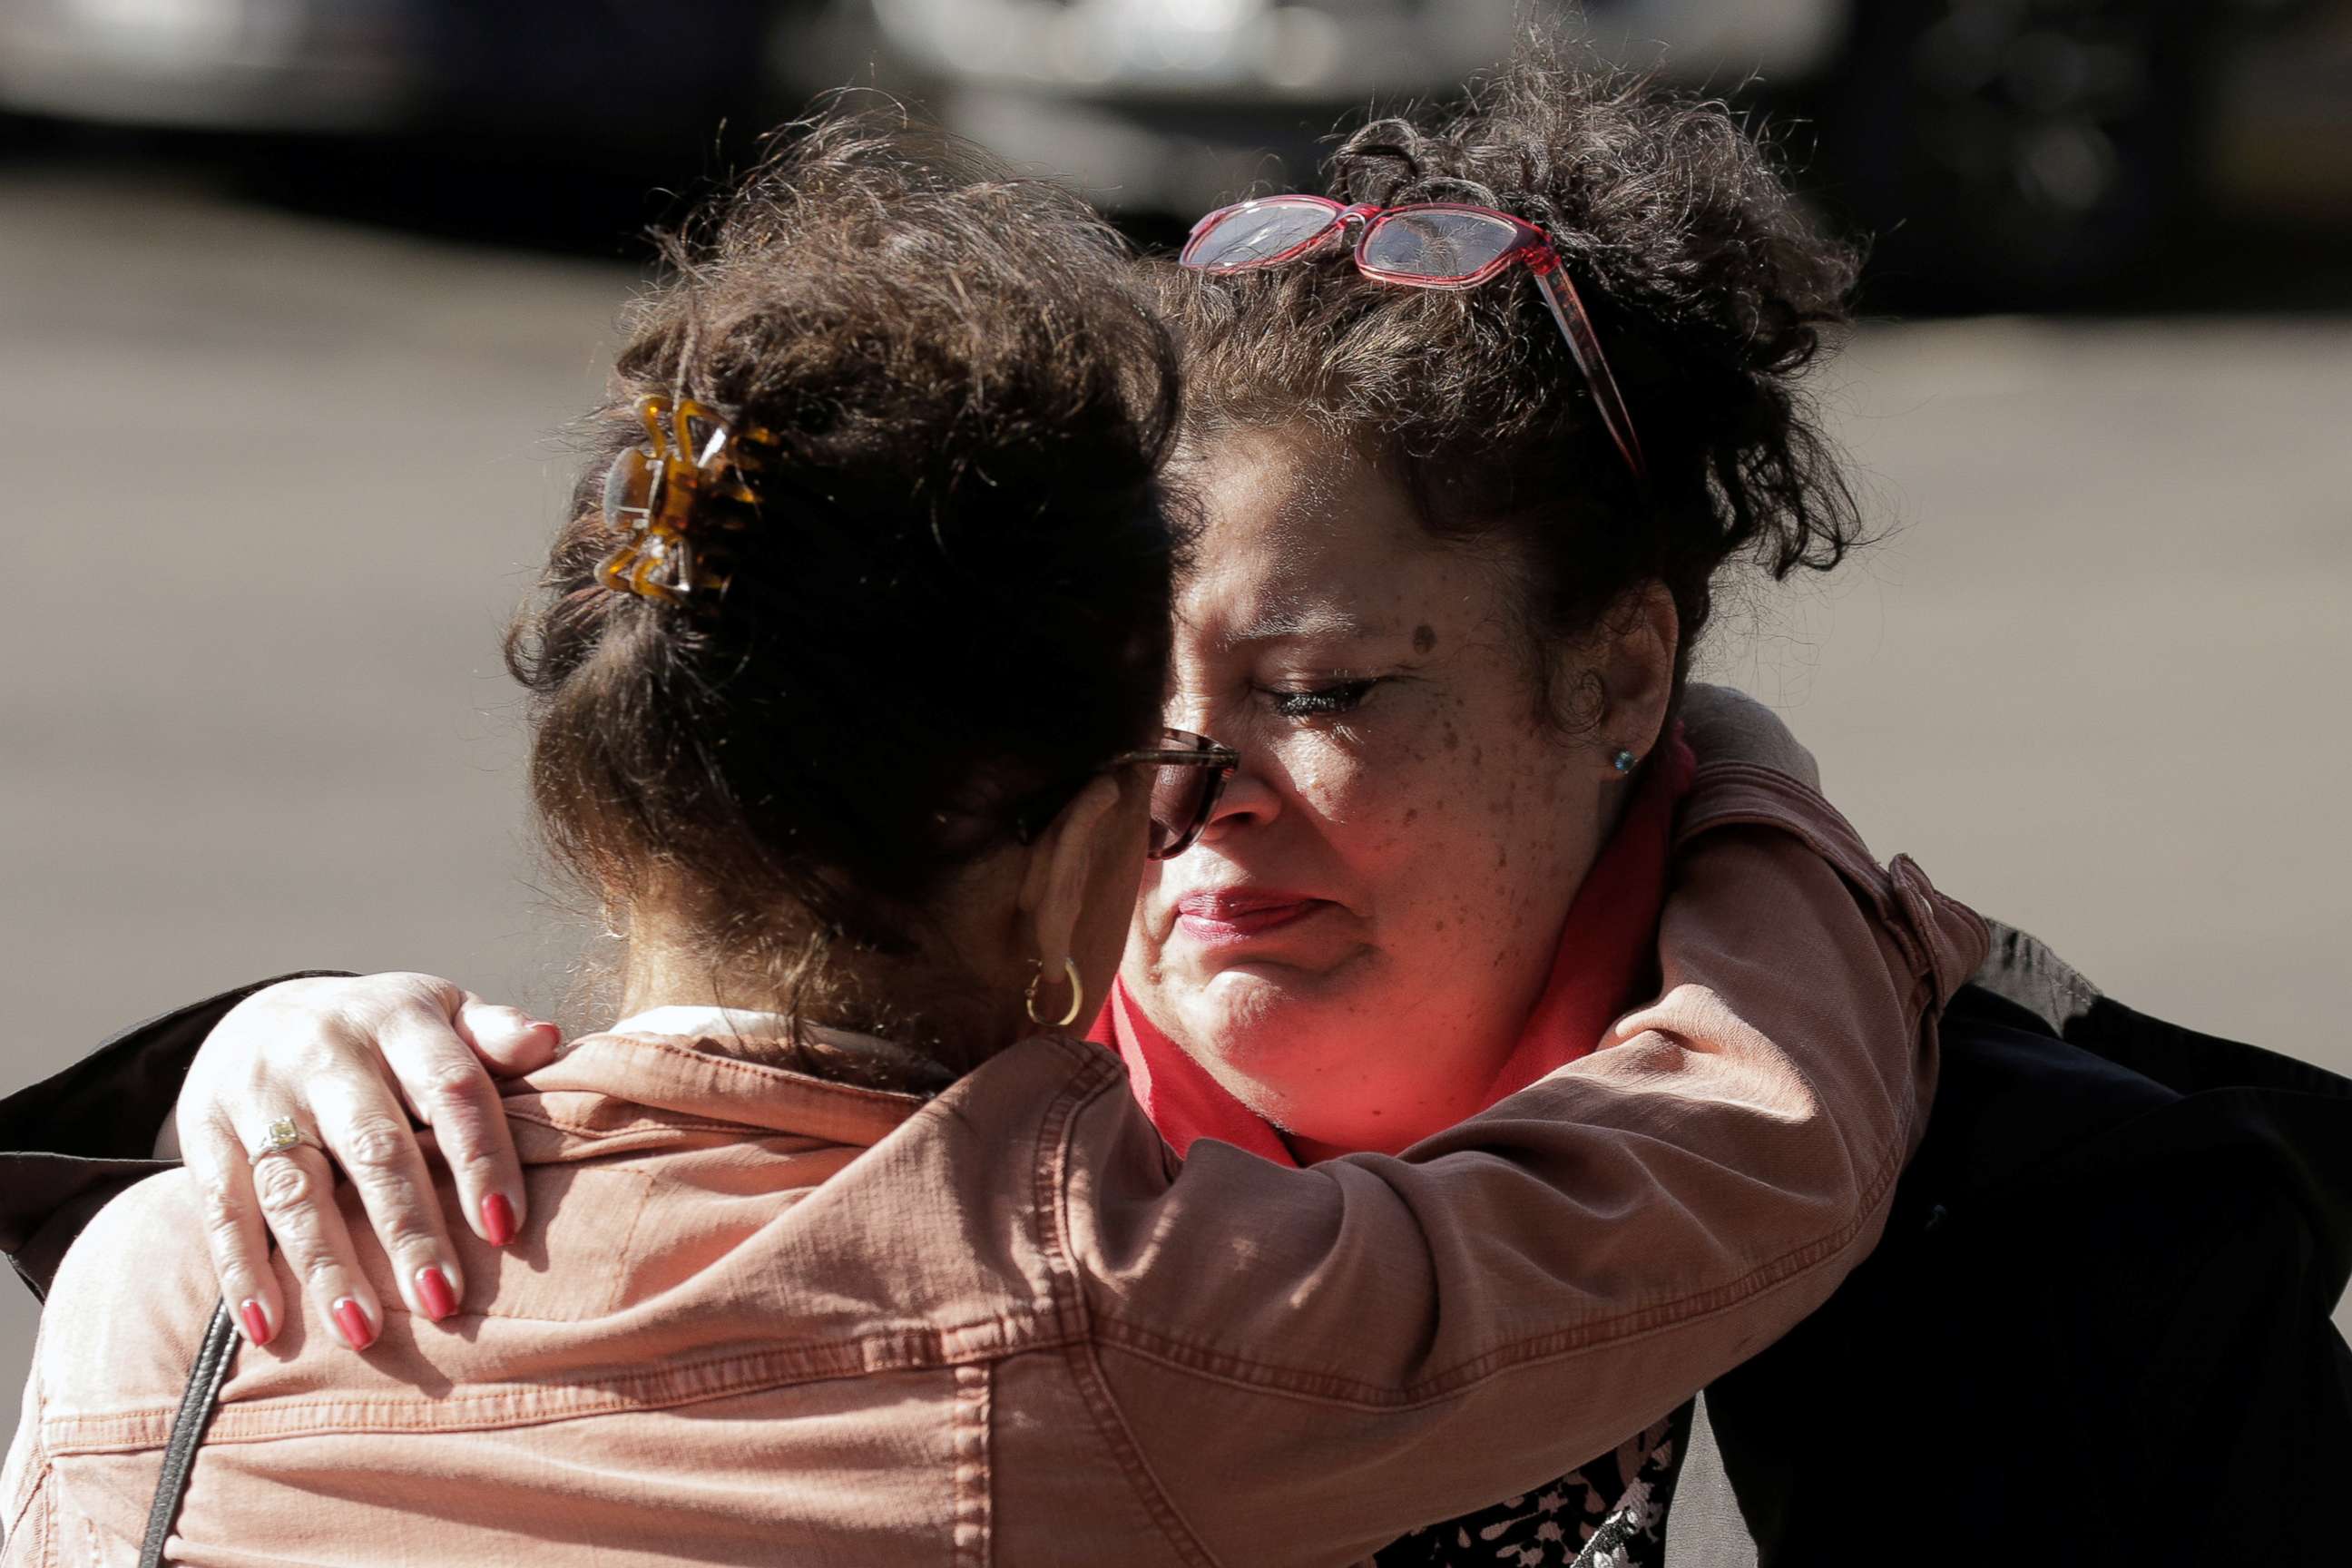 PHOTO: Carmen Gray, left, hugs her sister, Bridget Parkhill, after discussing concerns their mother, a resident at the Life Care Center of Kirkland, which has several confirmed coronavirus cases, in Kirkland, Wash., March 4, 2020.